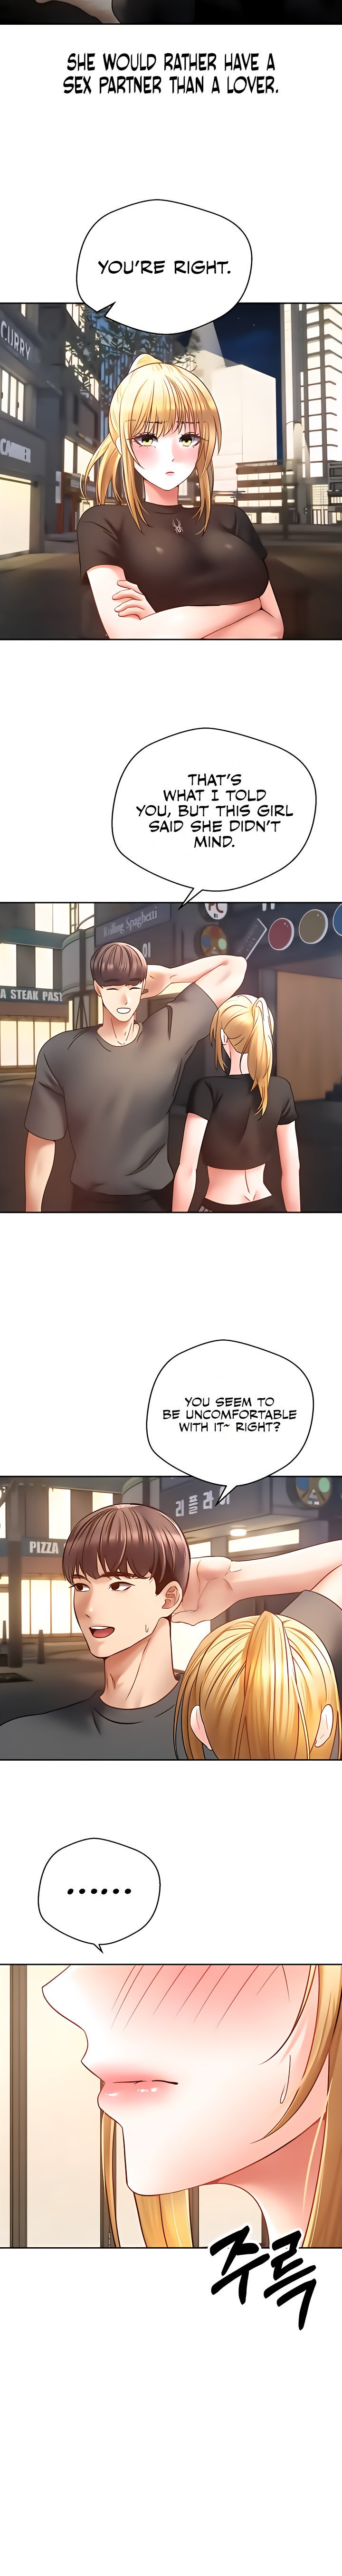 Desire Realization App - Chapter 43 Page 6